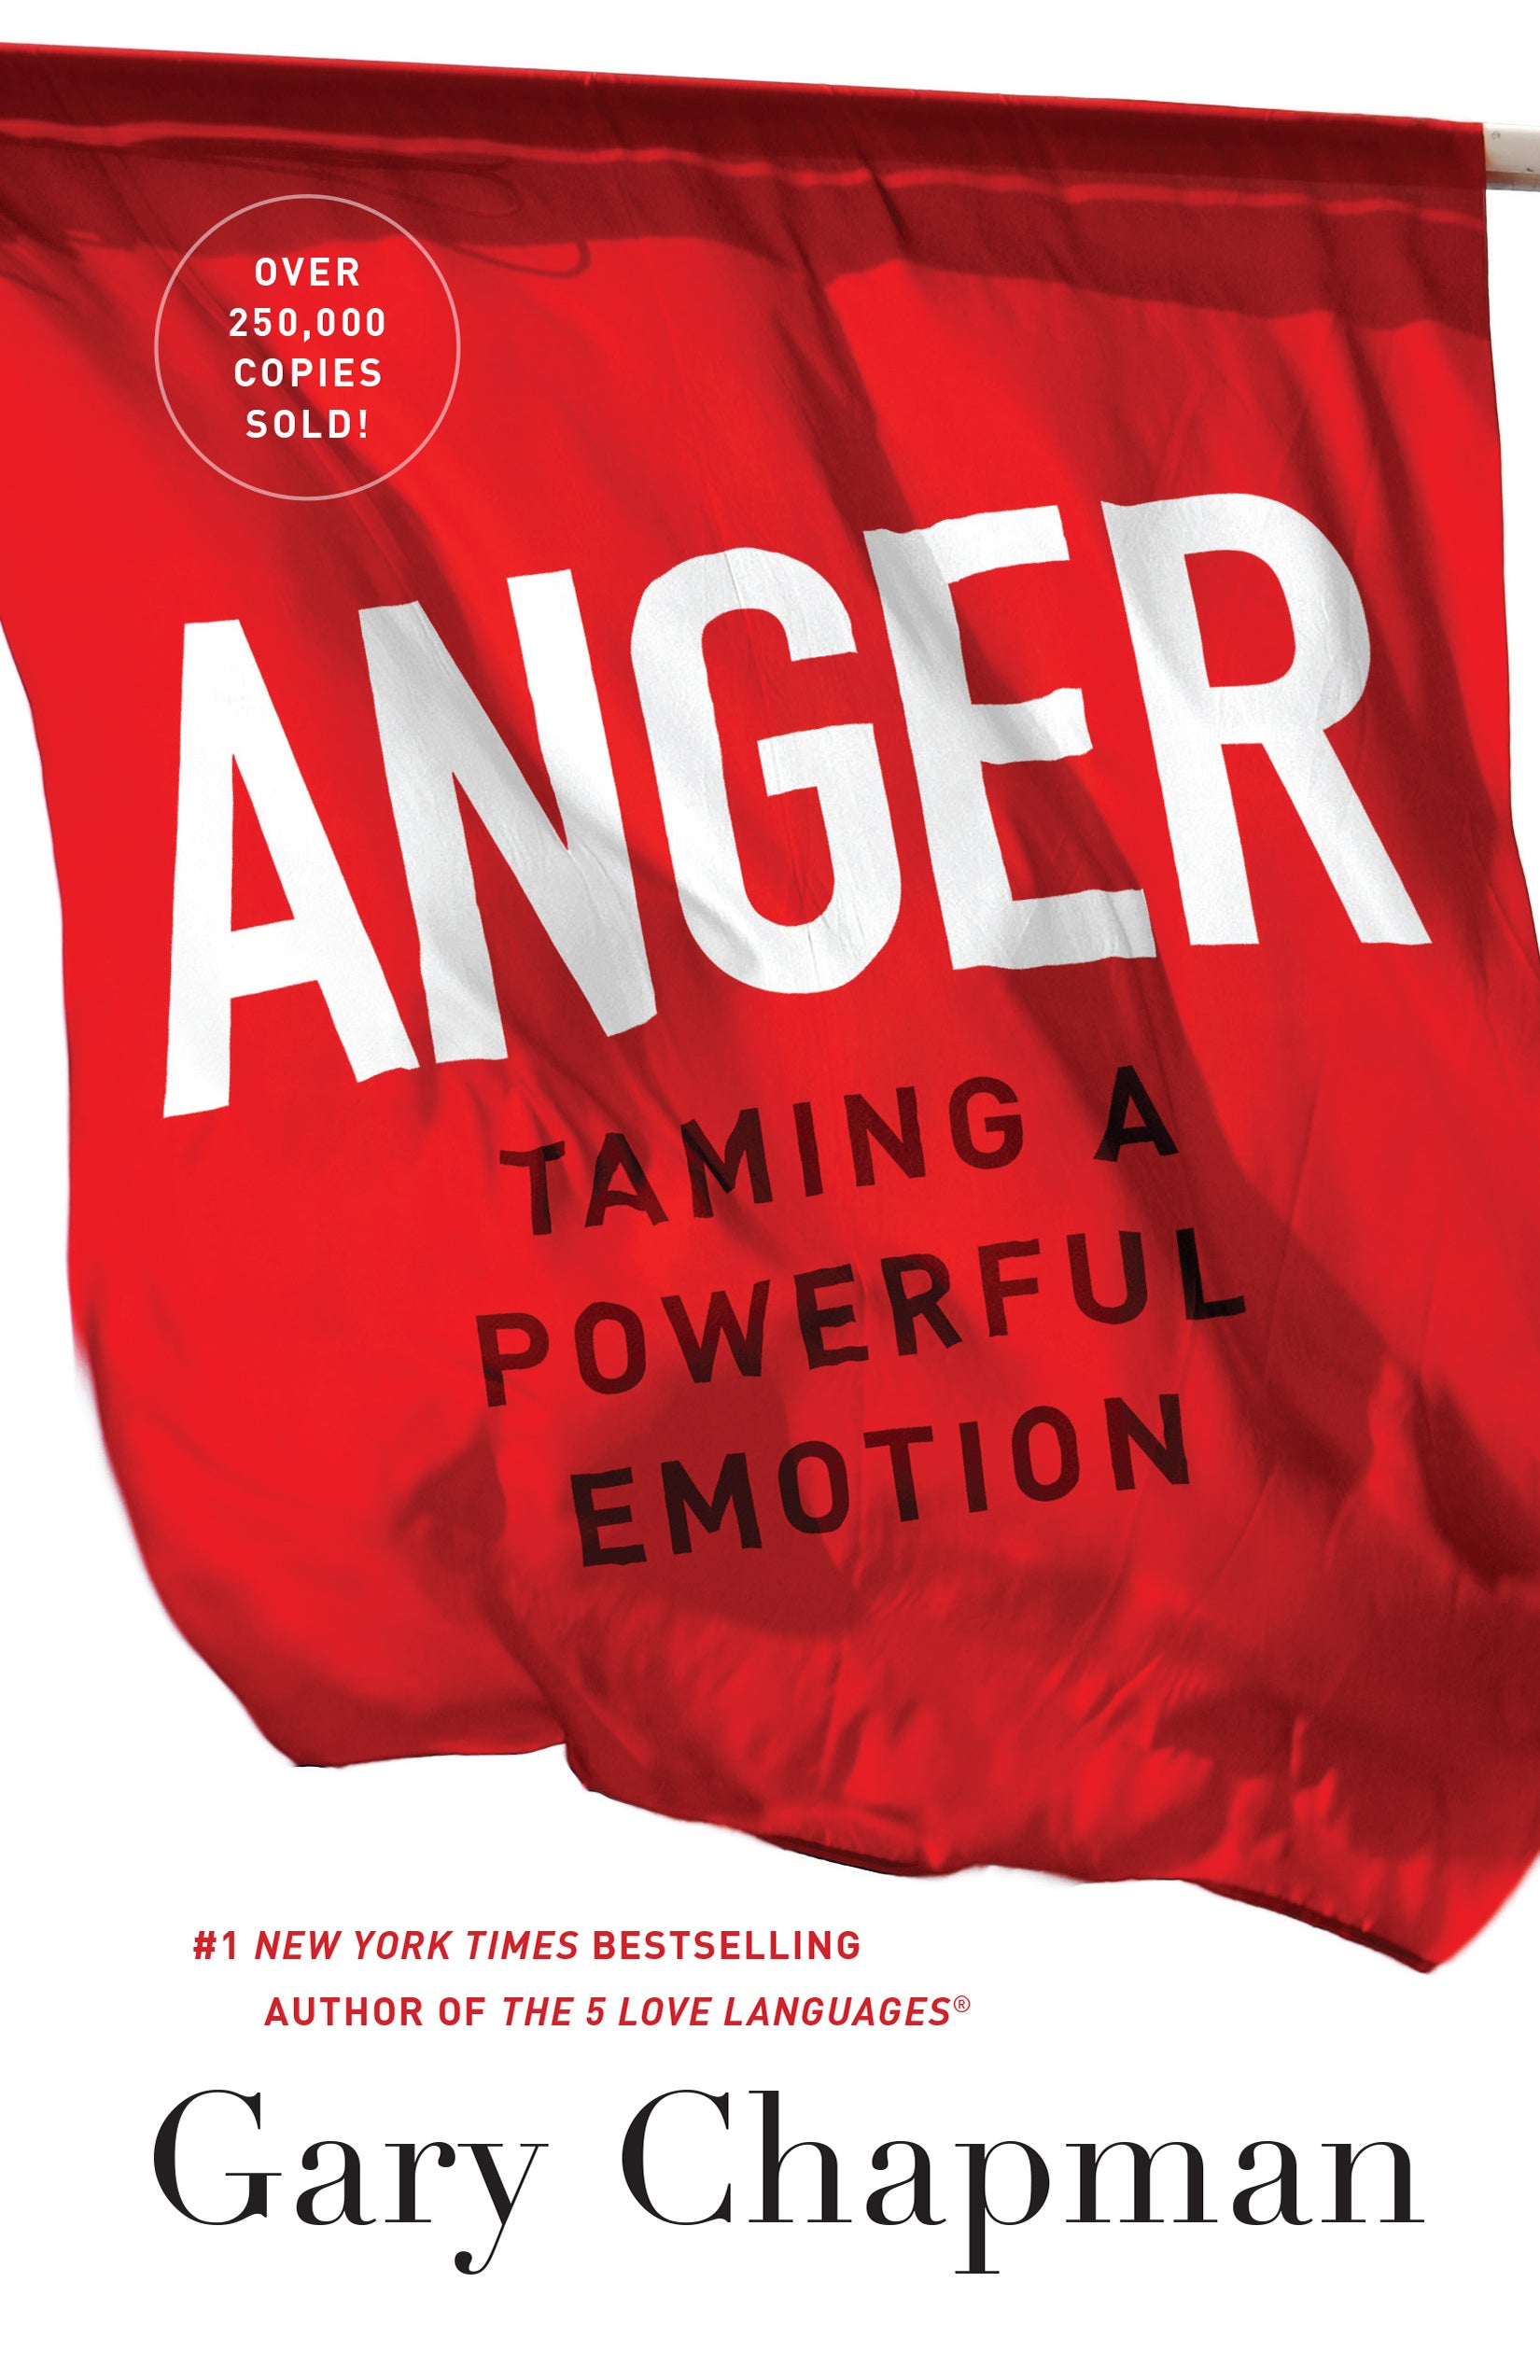 Image of Anger other